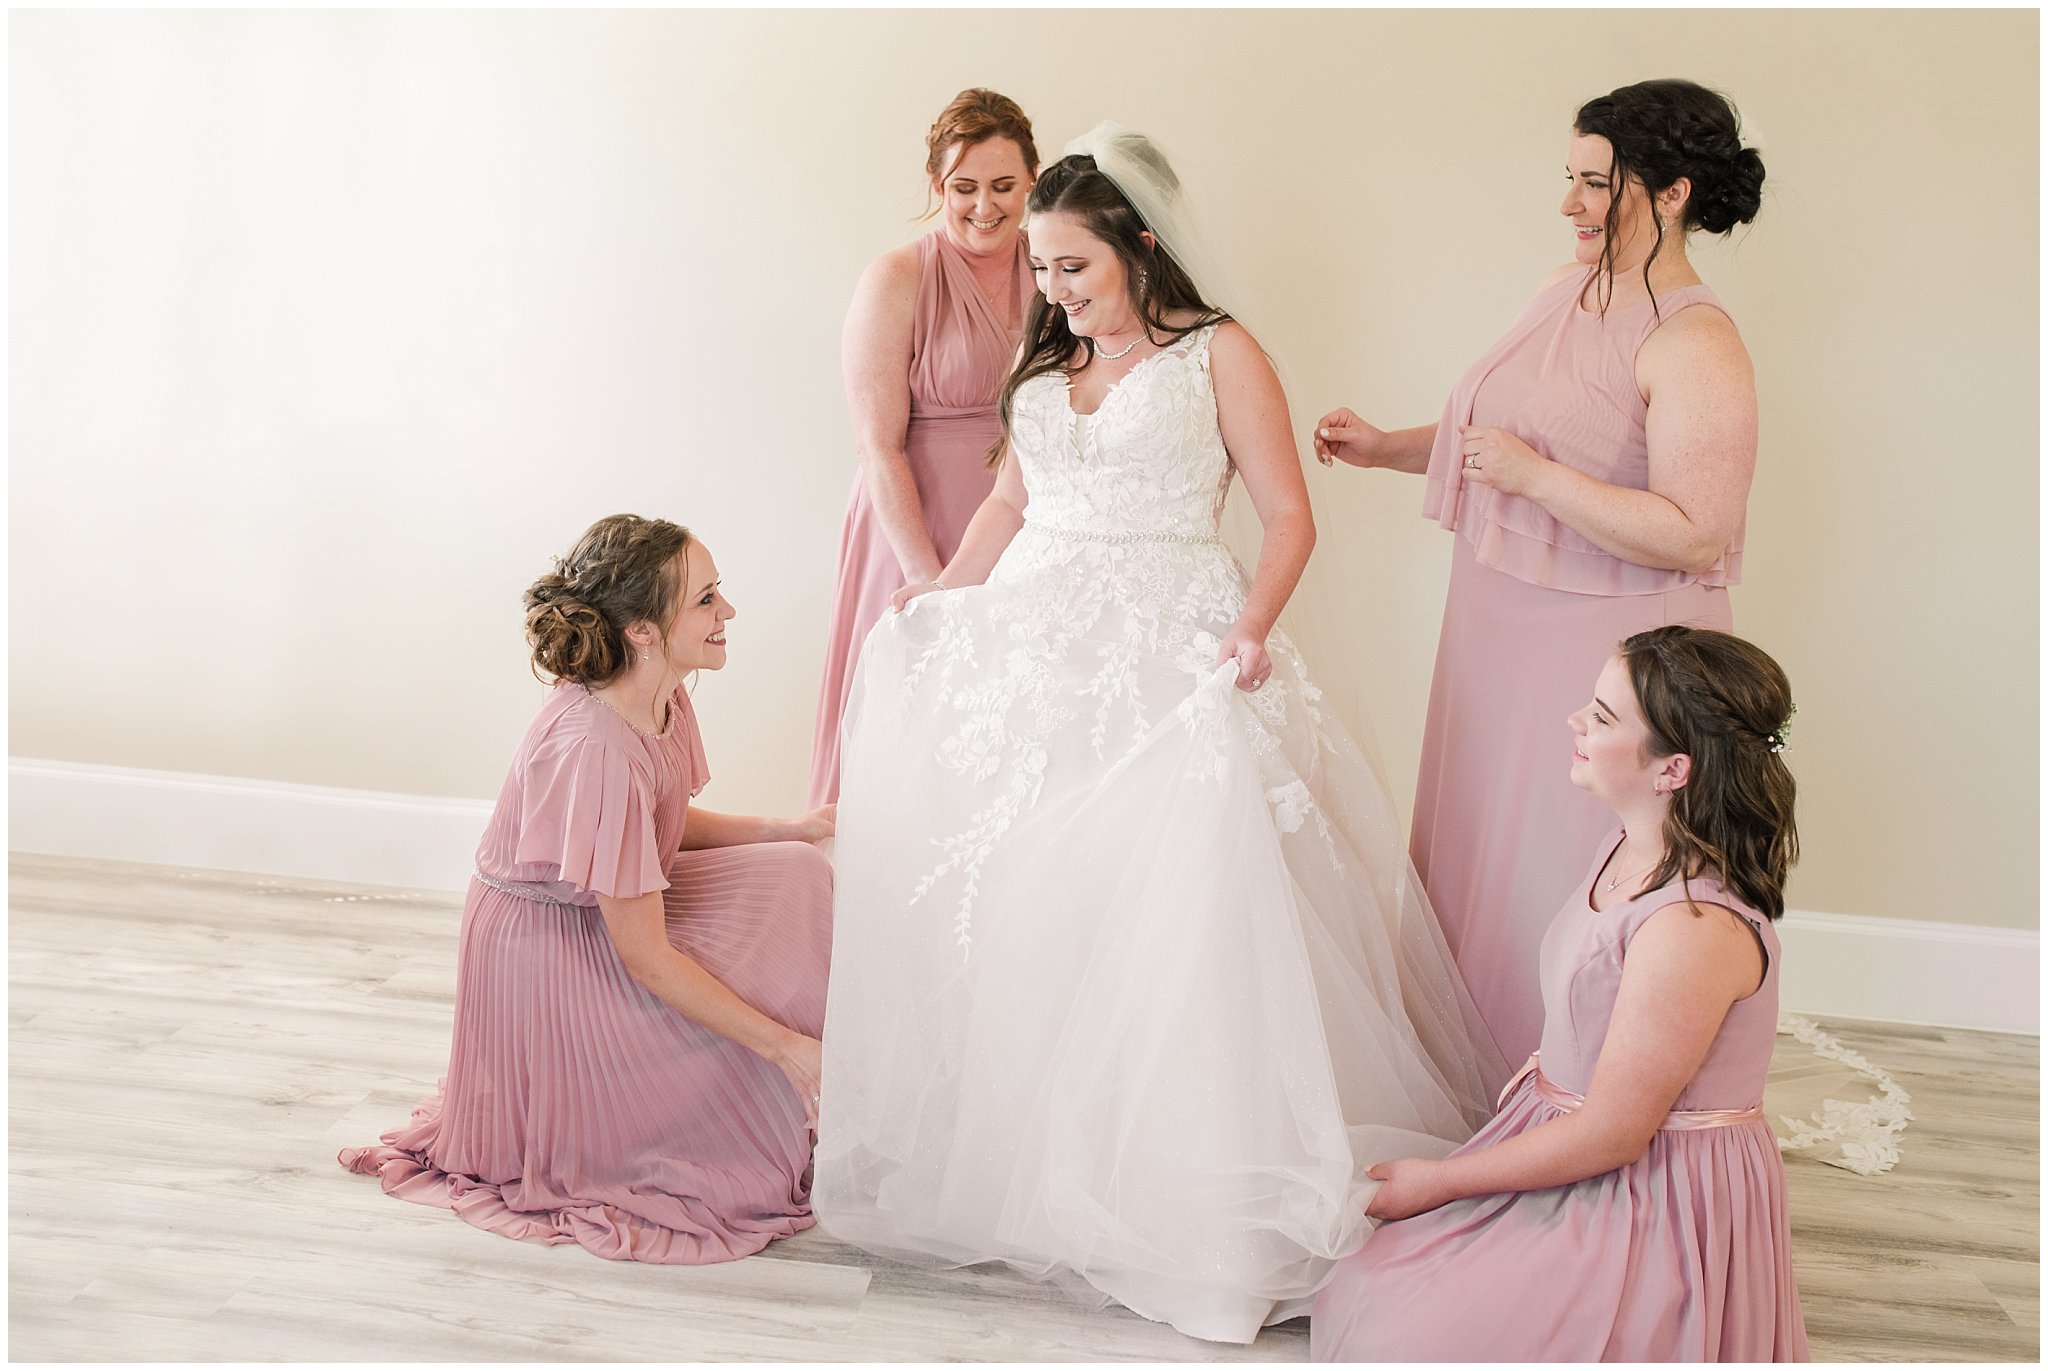 Bride with bridesmaids in dusty rose dresses getting ready | Oak Hills Utah Dusty Rose and Gray Summer Wedding | Jessie and Dallin Photography